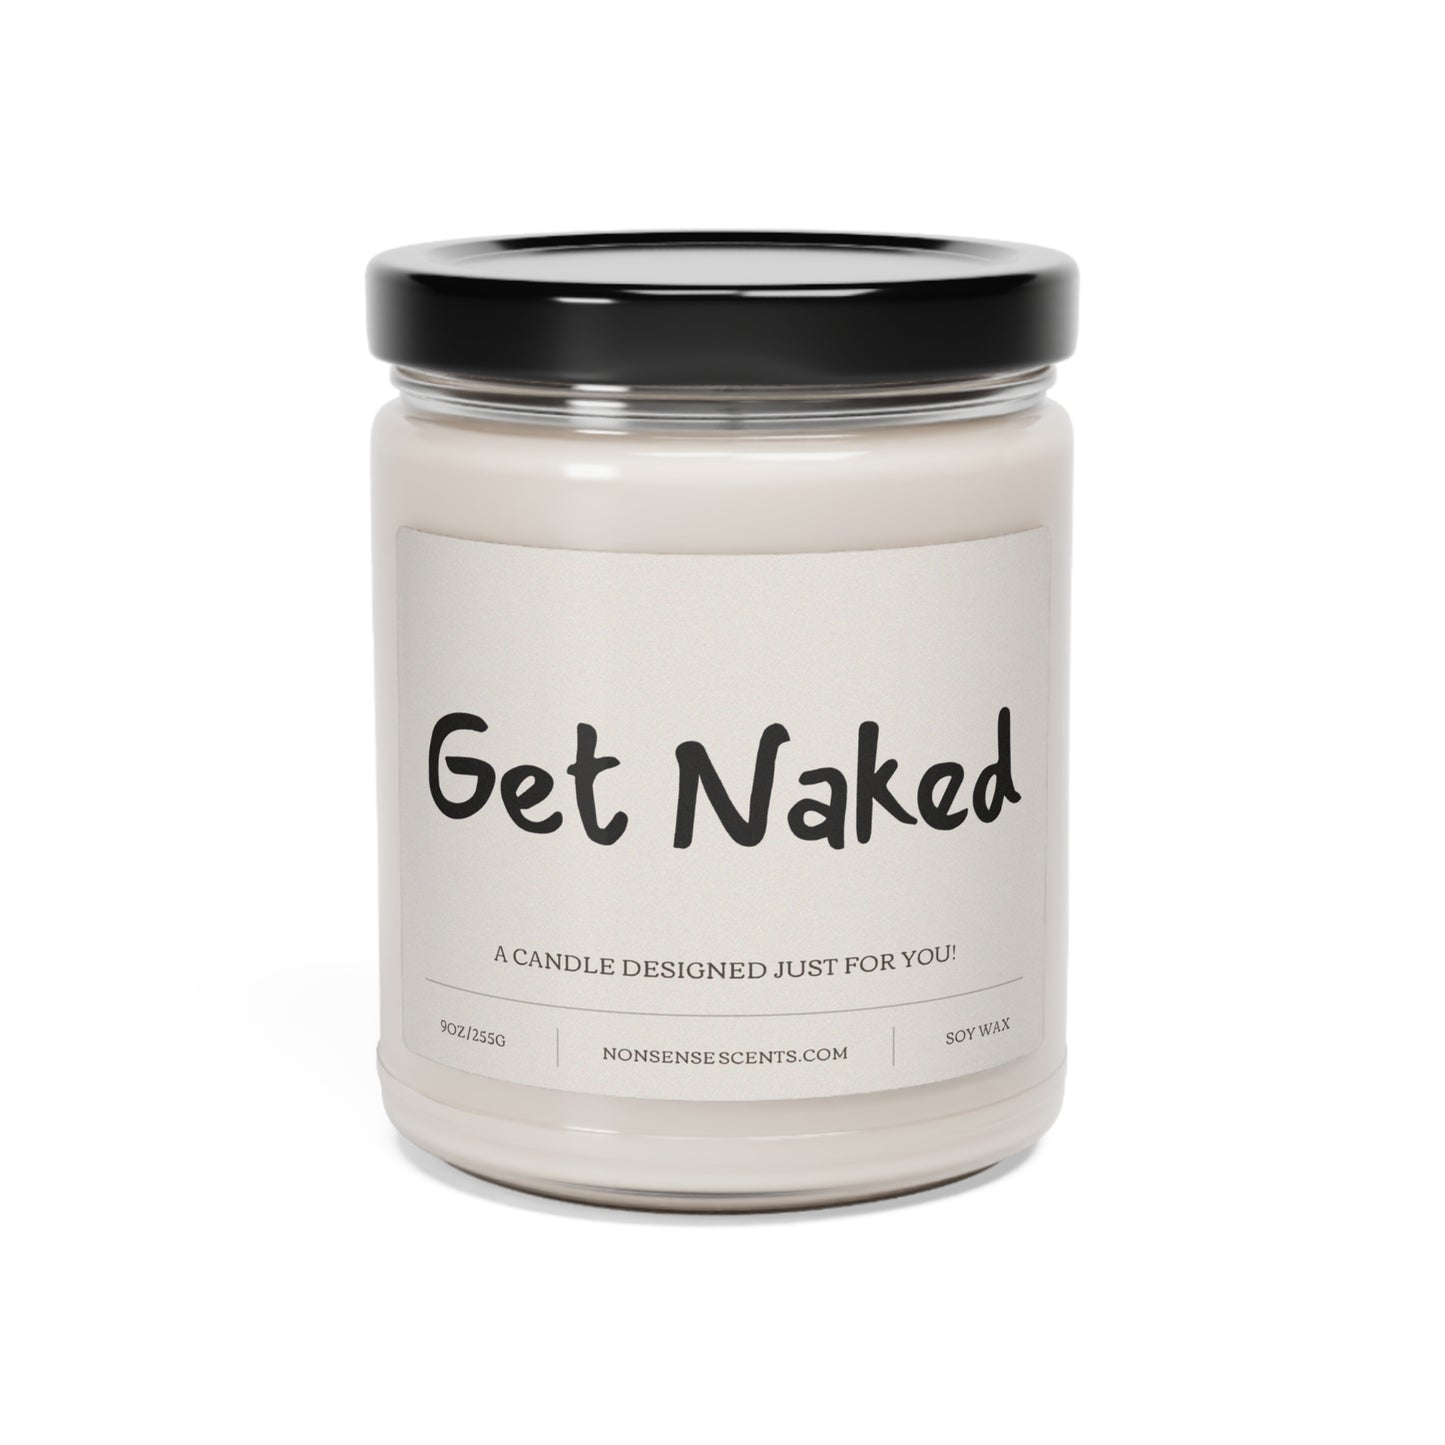 "Get Naked" Scented Candle